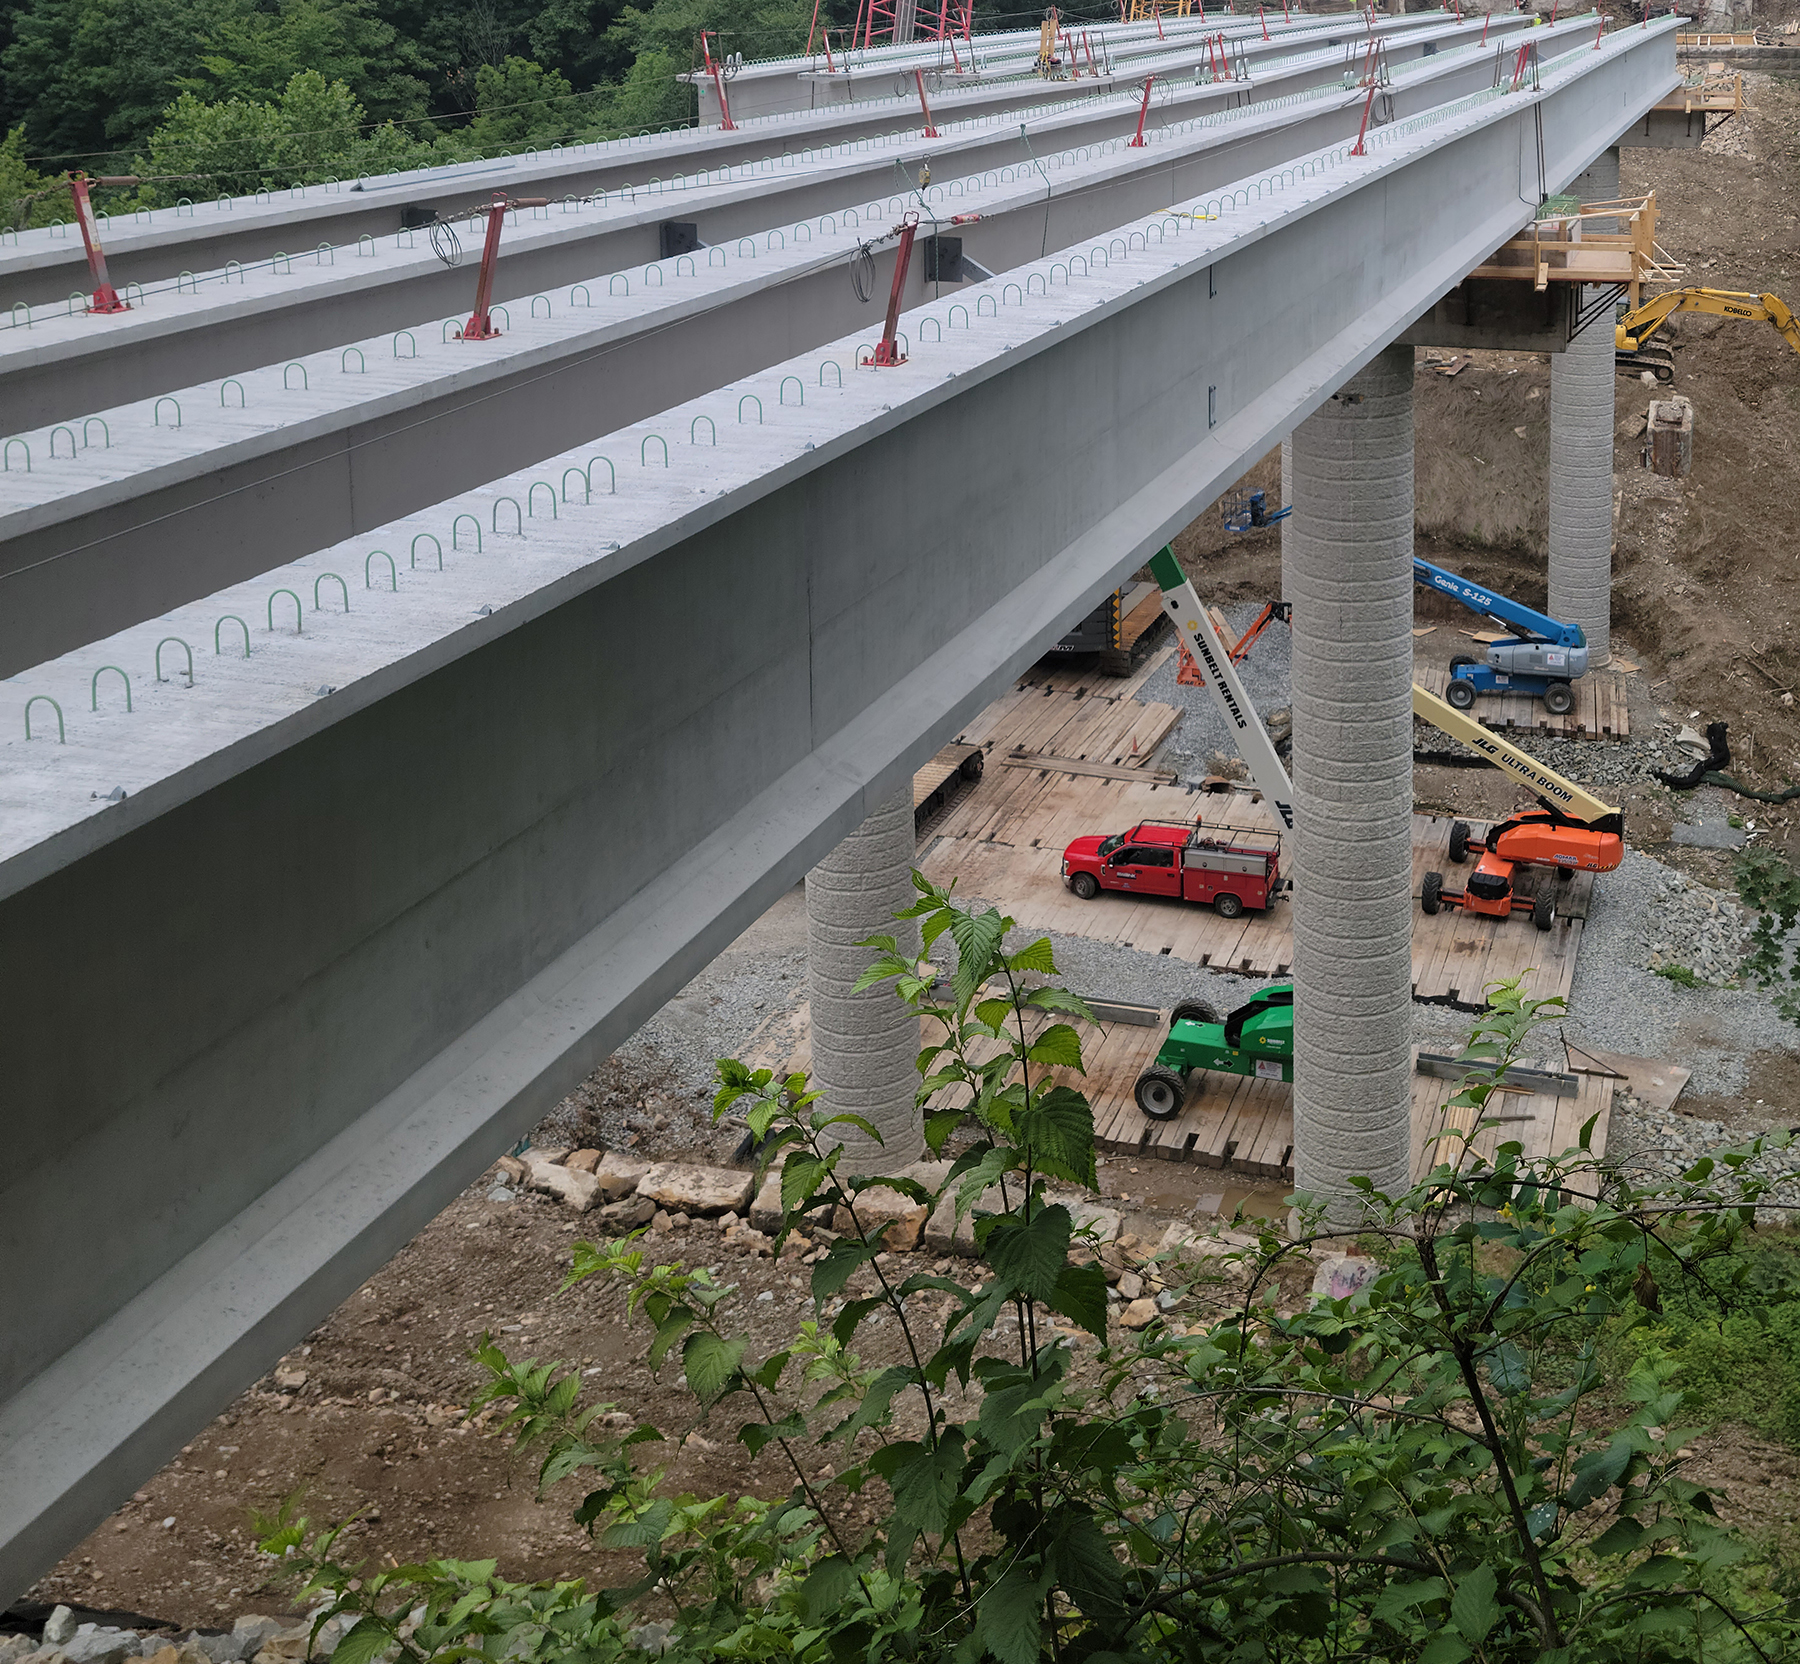 The new bridge includes Pennsylvania bulb-tee beams supported by two-column piers founded on 8.5 ft diameter drilled shafts. (Image courtesy HDR Inc.)